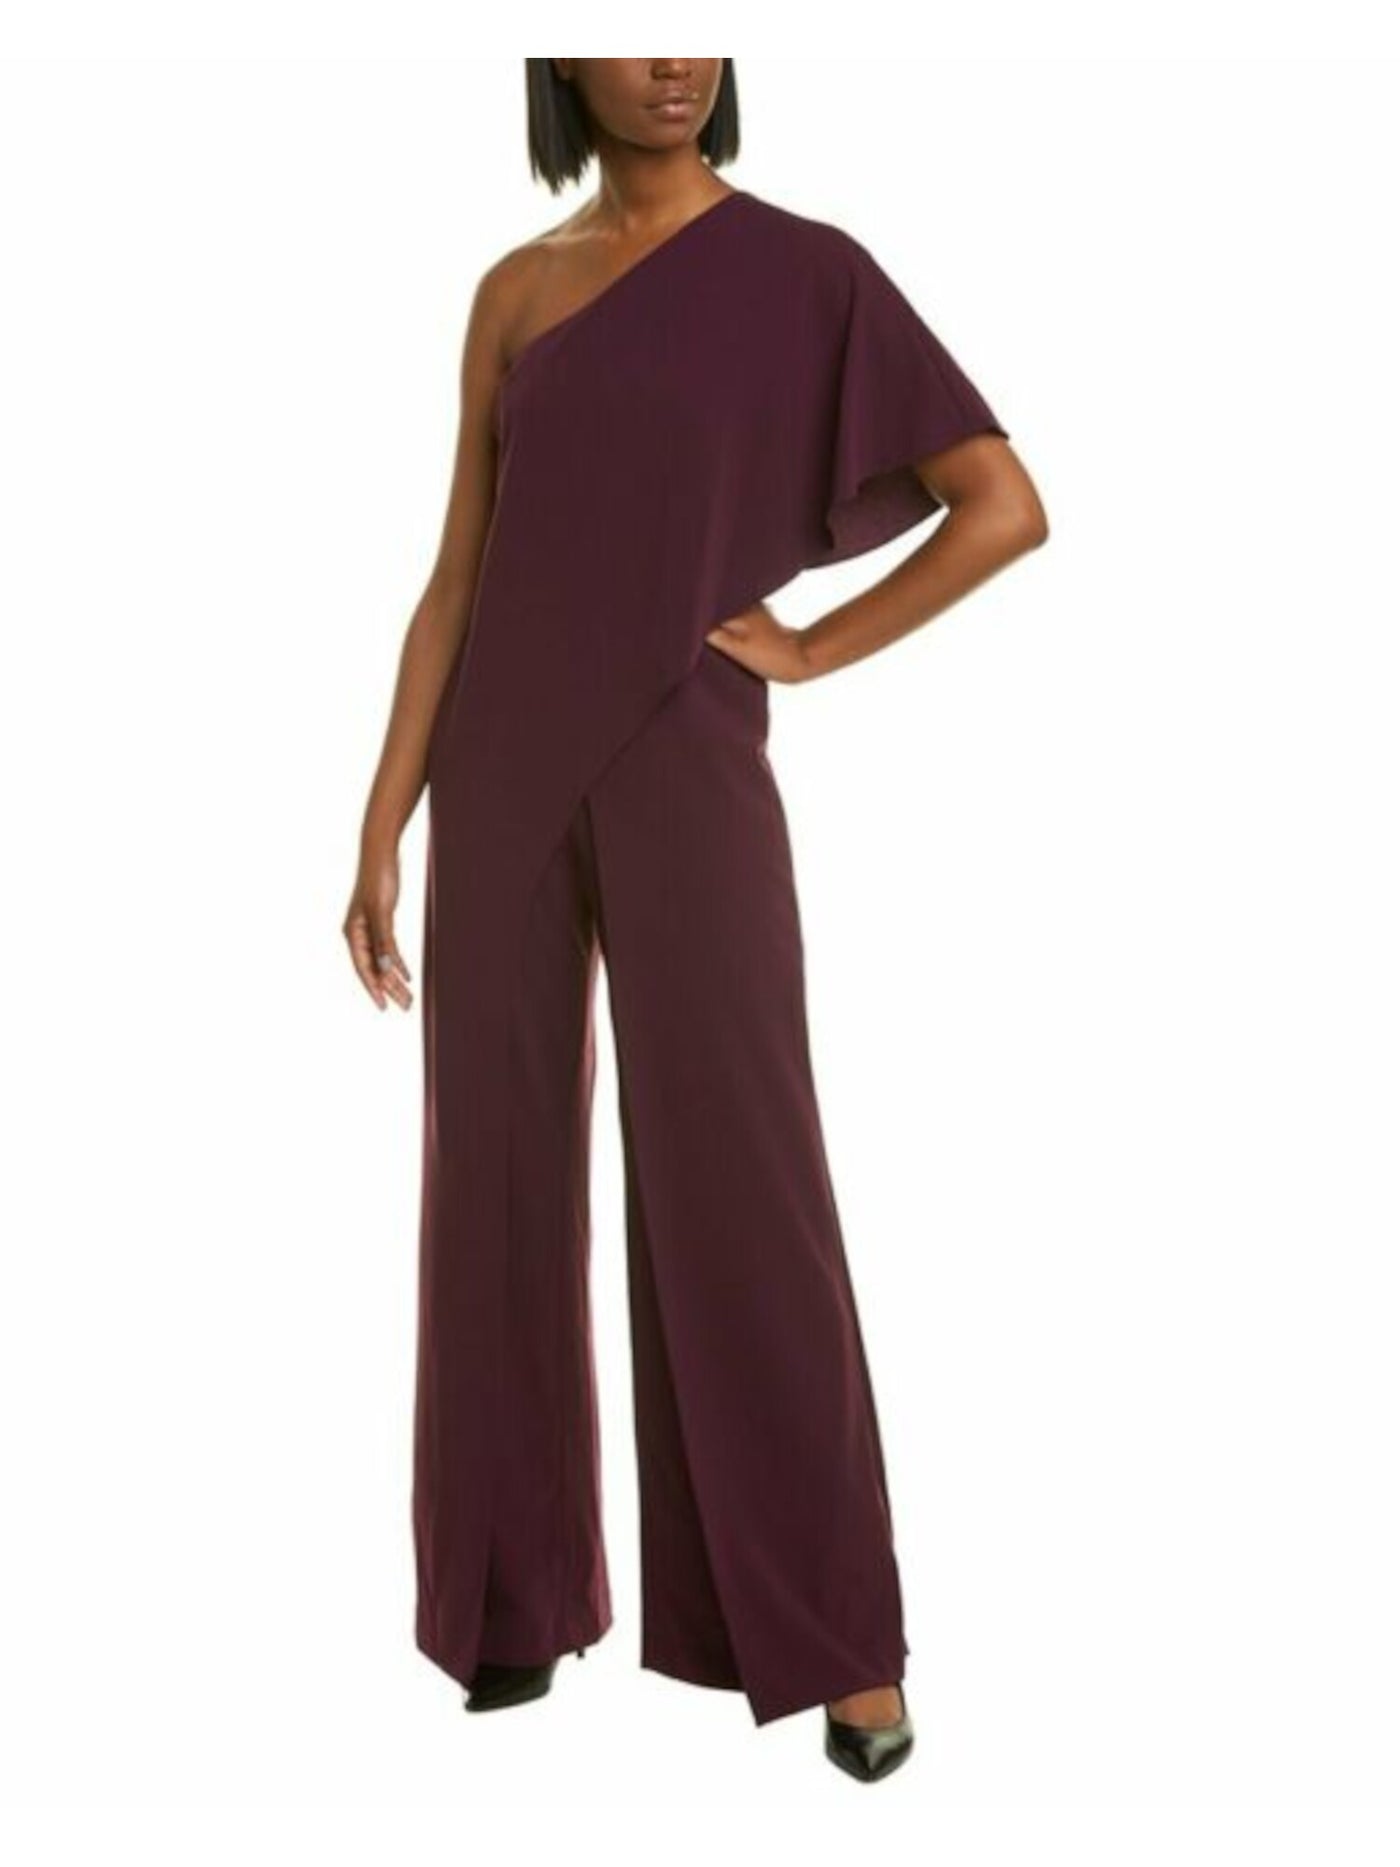 ADRIANNA PAPELL Womens Ruffled Zippered One-shoulder Overlay Kimono Sleeve Asymmetrical Neckline Party Wide Leg Jumpsuit